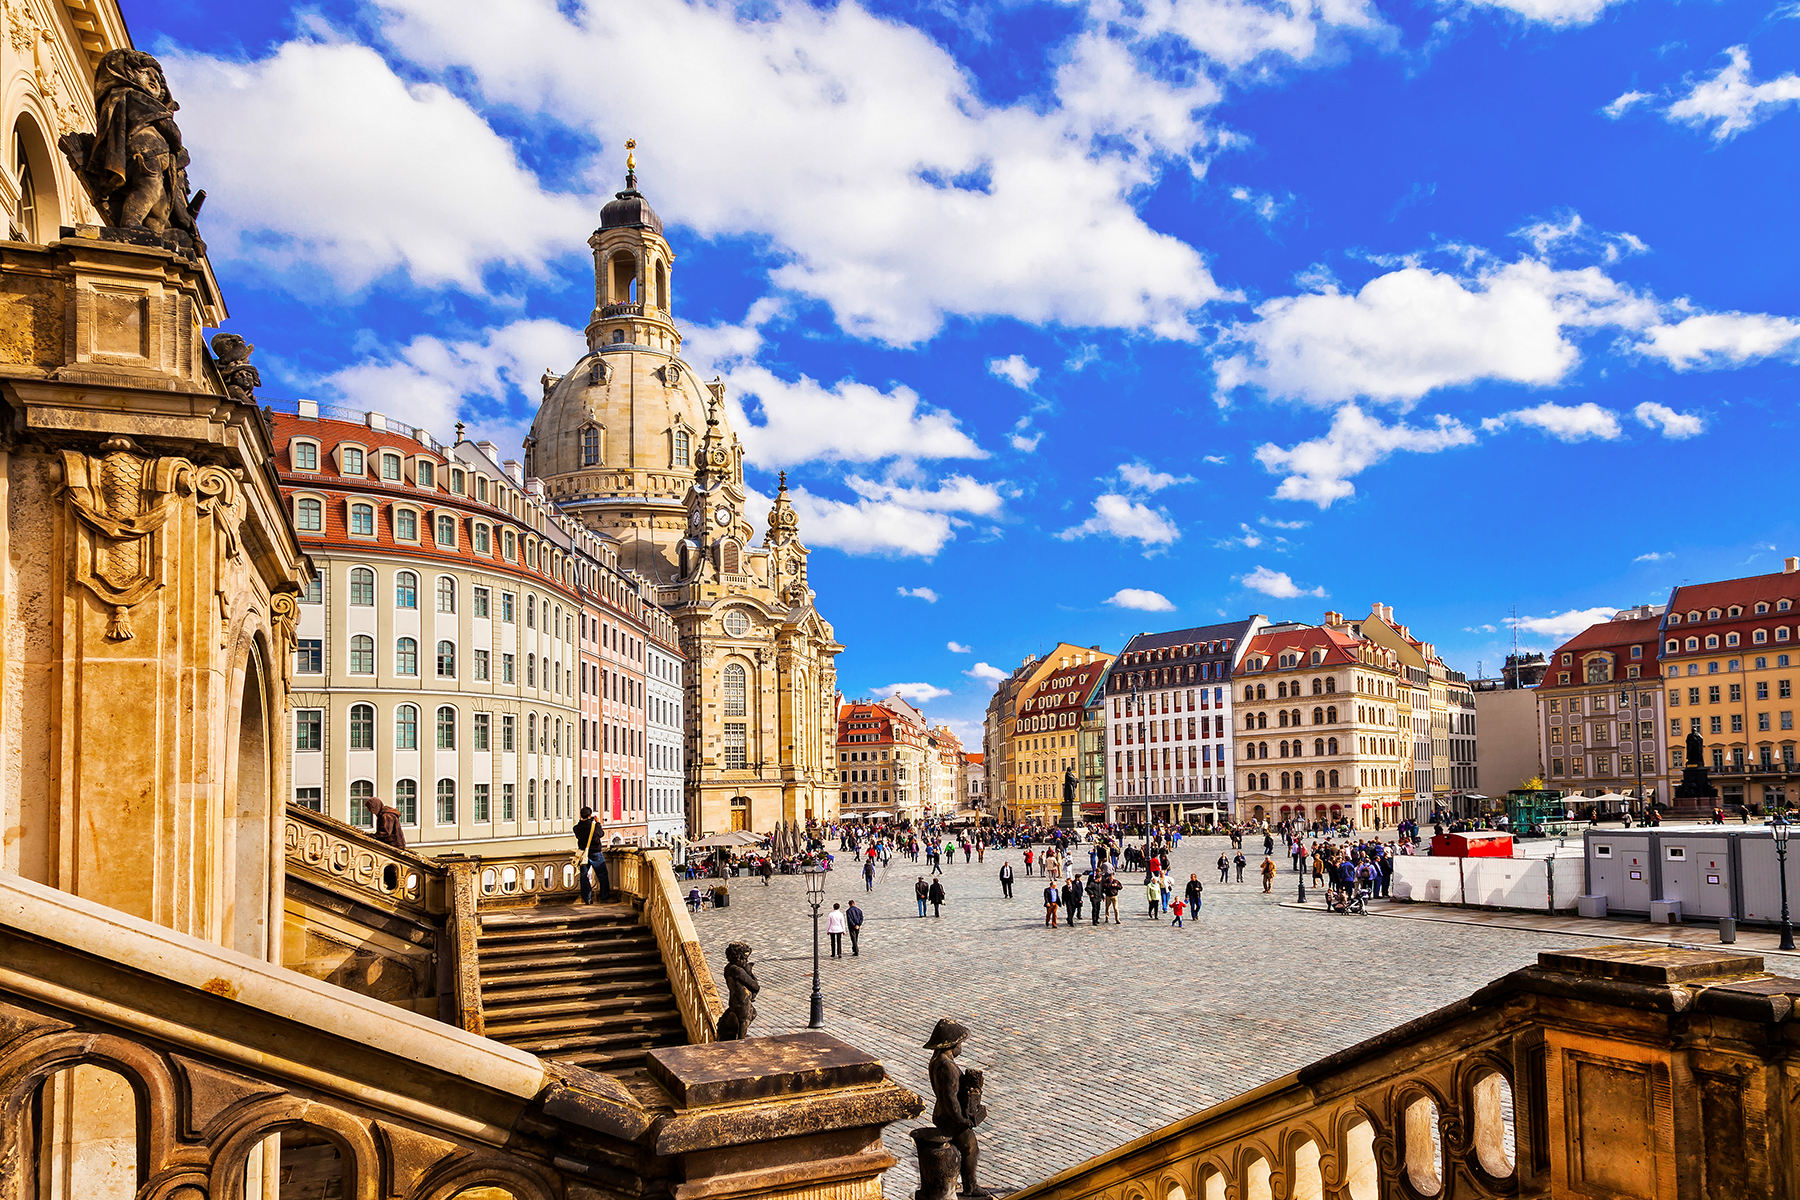 A town square in Dresden, with large old buildings surrounding a cobblestone street with people wandering around. 